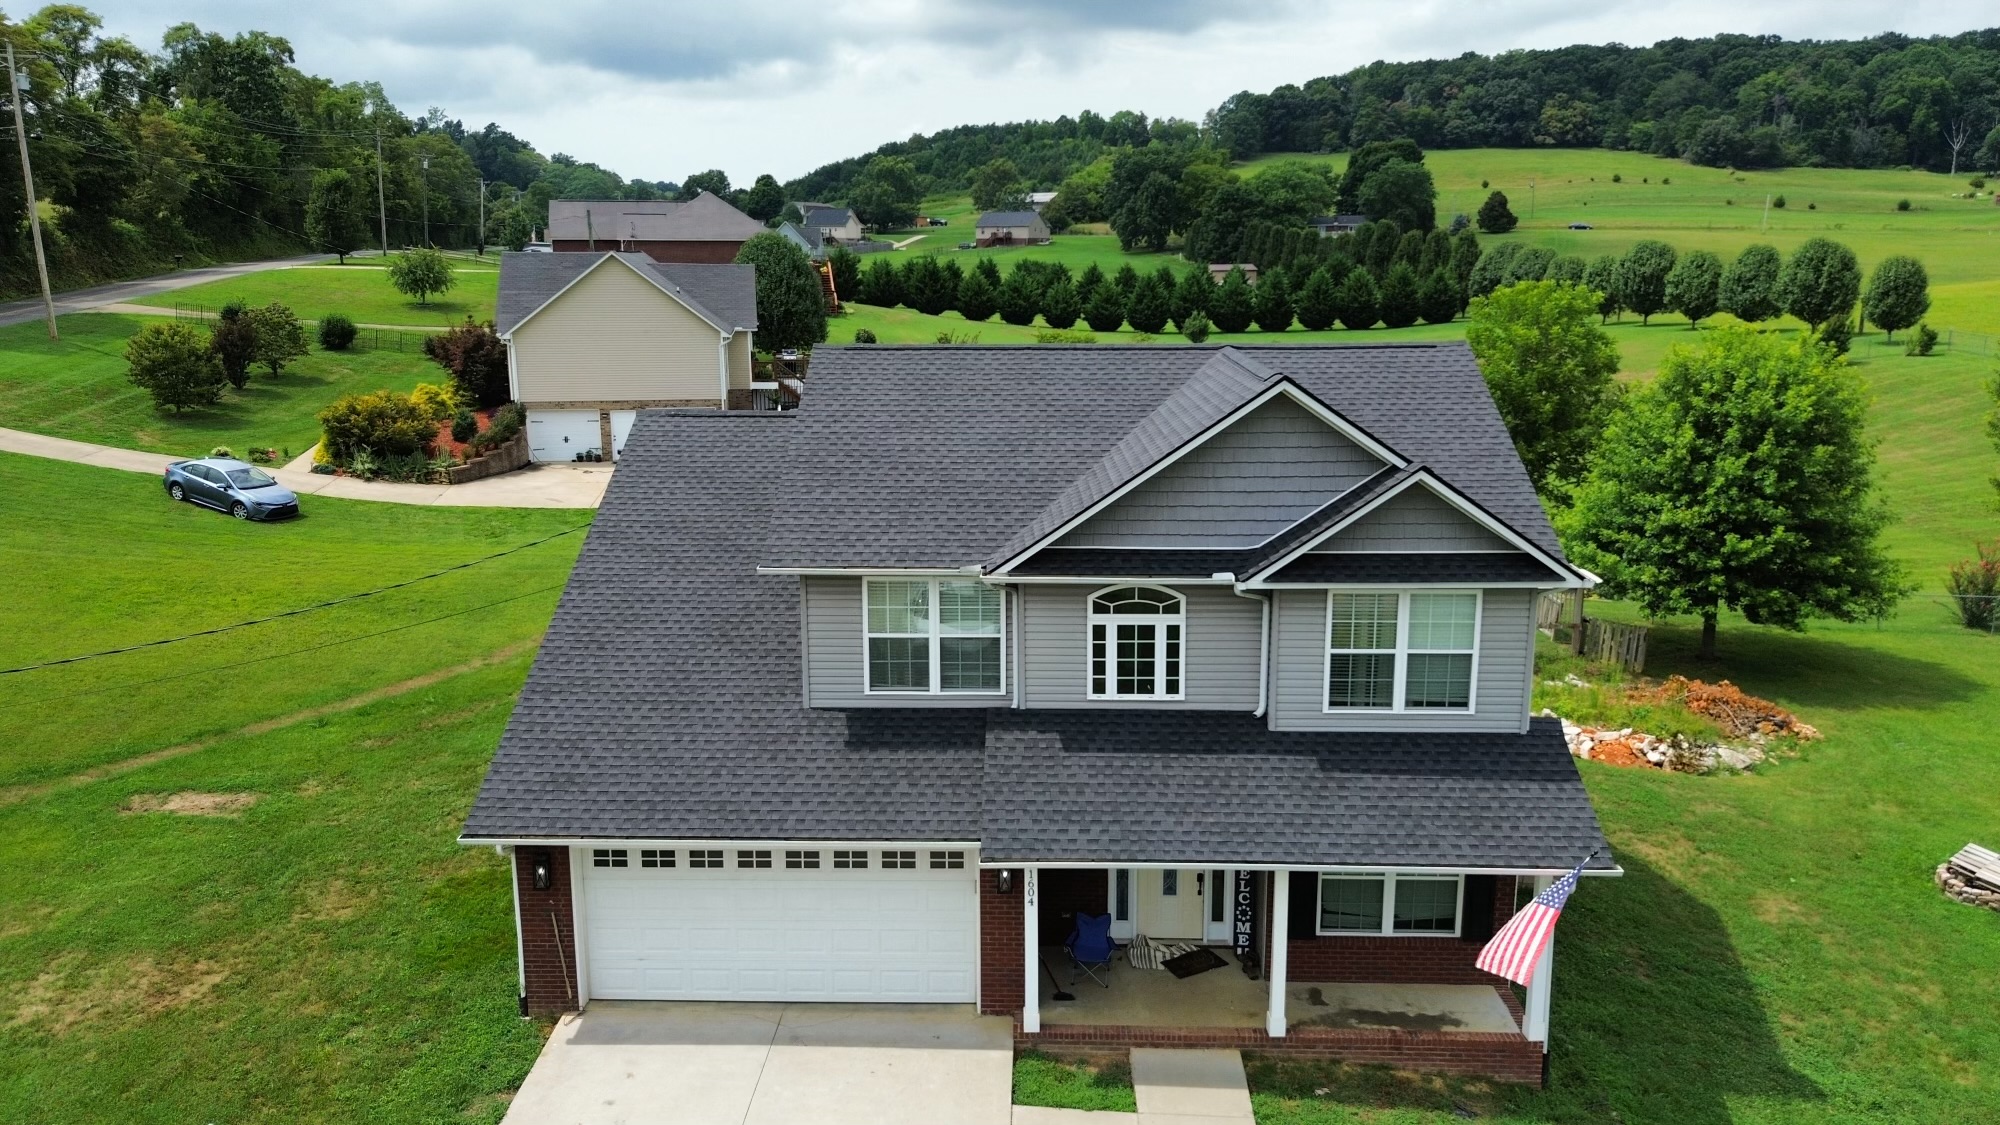 A New Roof for a Talbott Home: A Shingle Roofing Success with GAF's Timberline UHDZ Charcoal Shingles